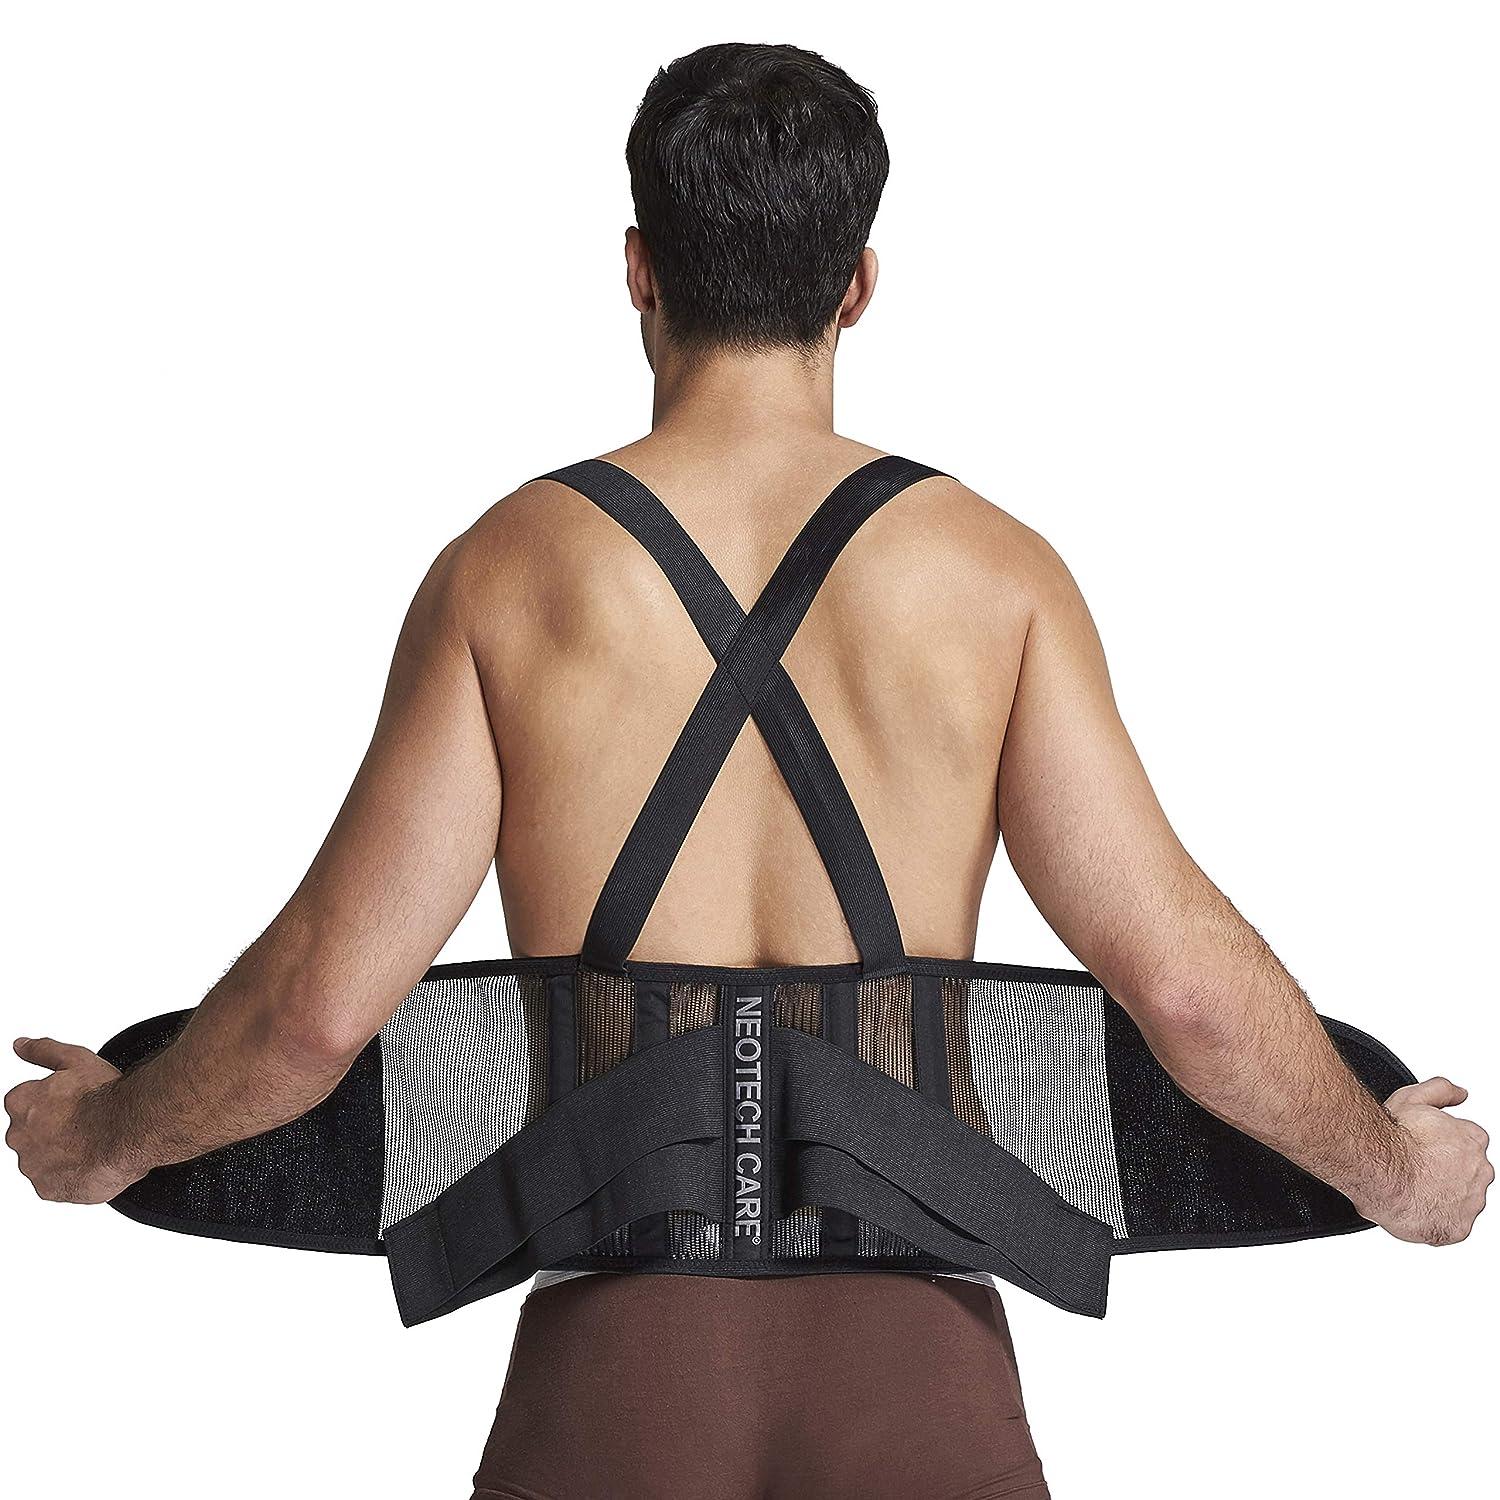 How Does a Back Brace Work?